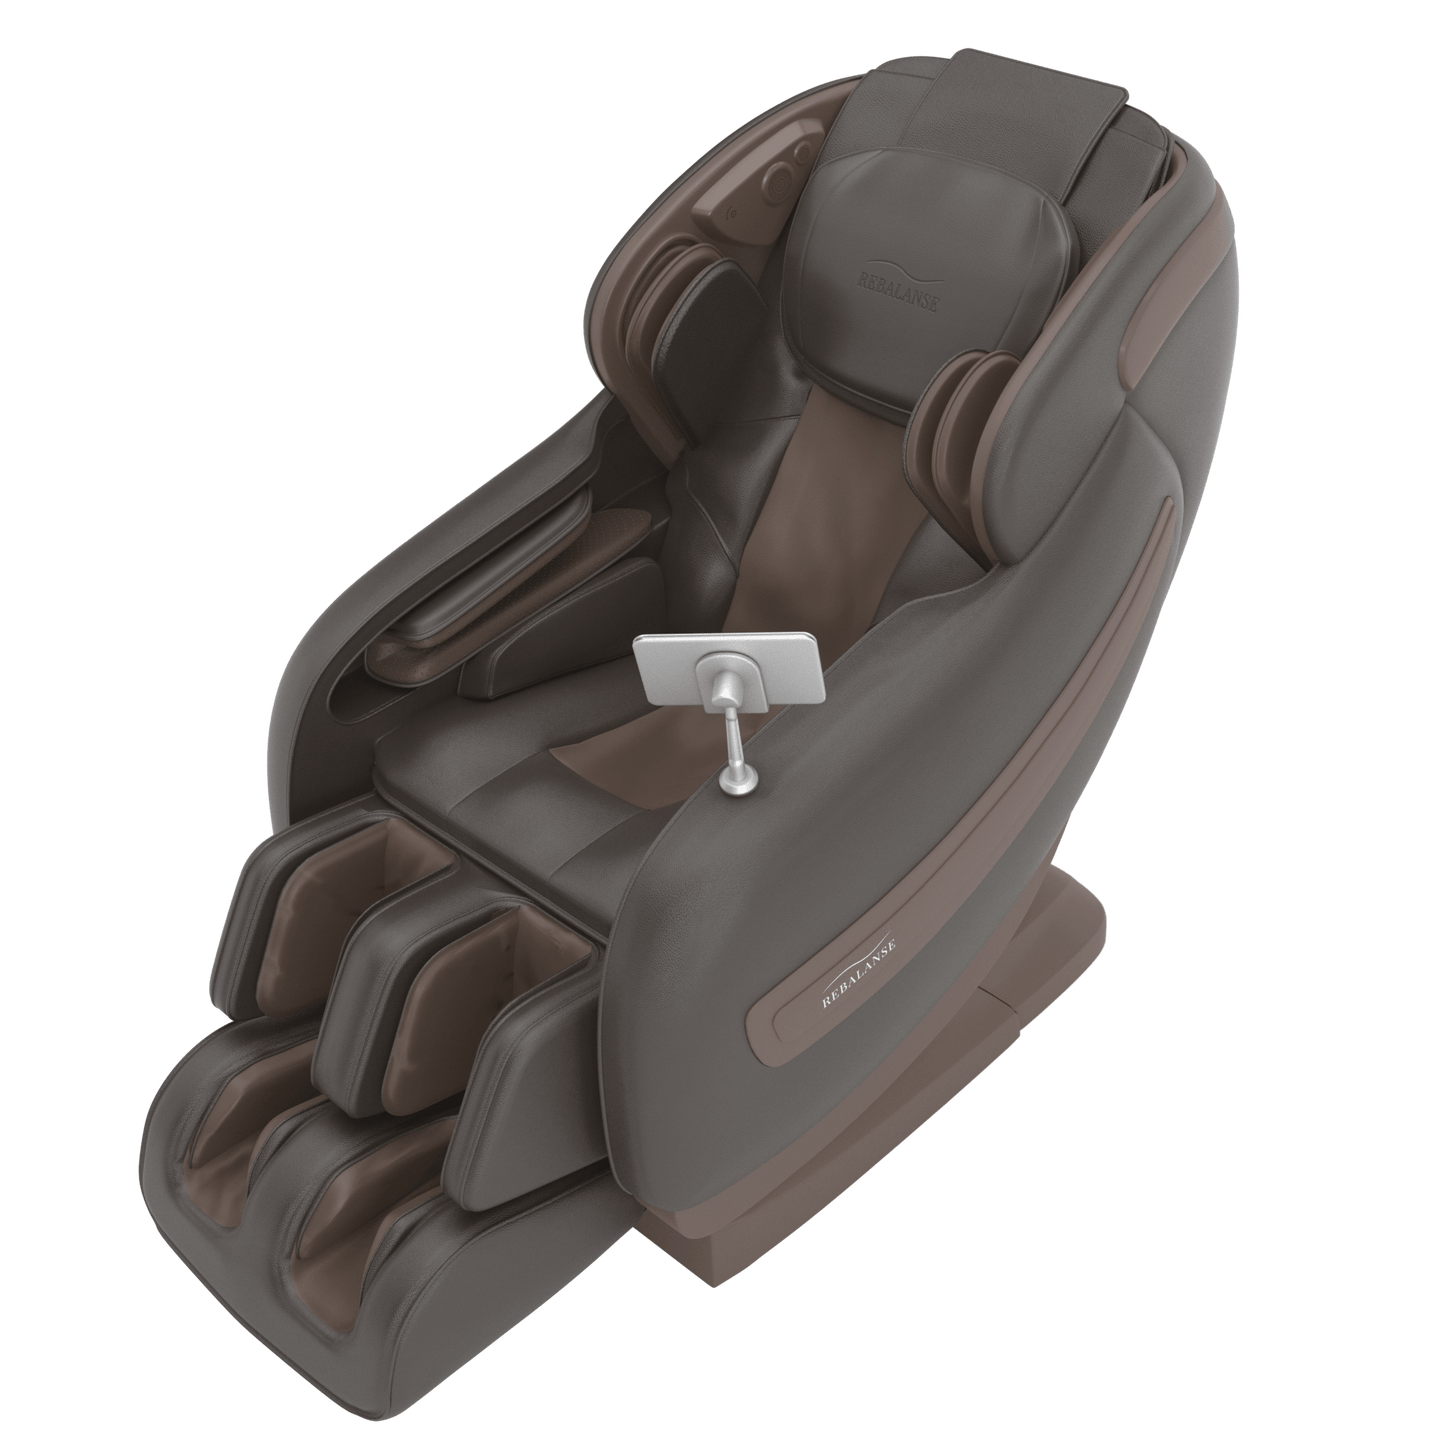 Super MD Massage Chair Brown Color